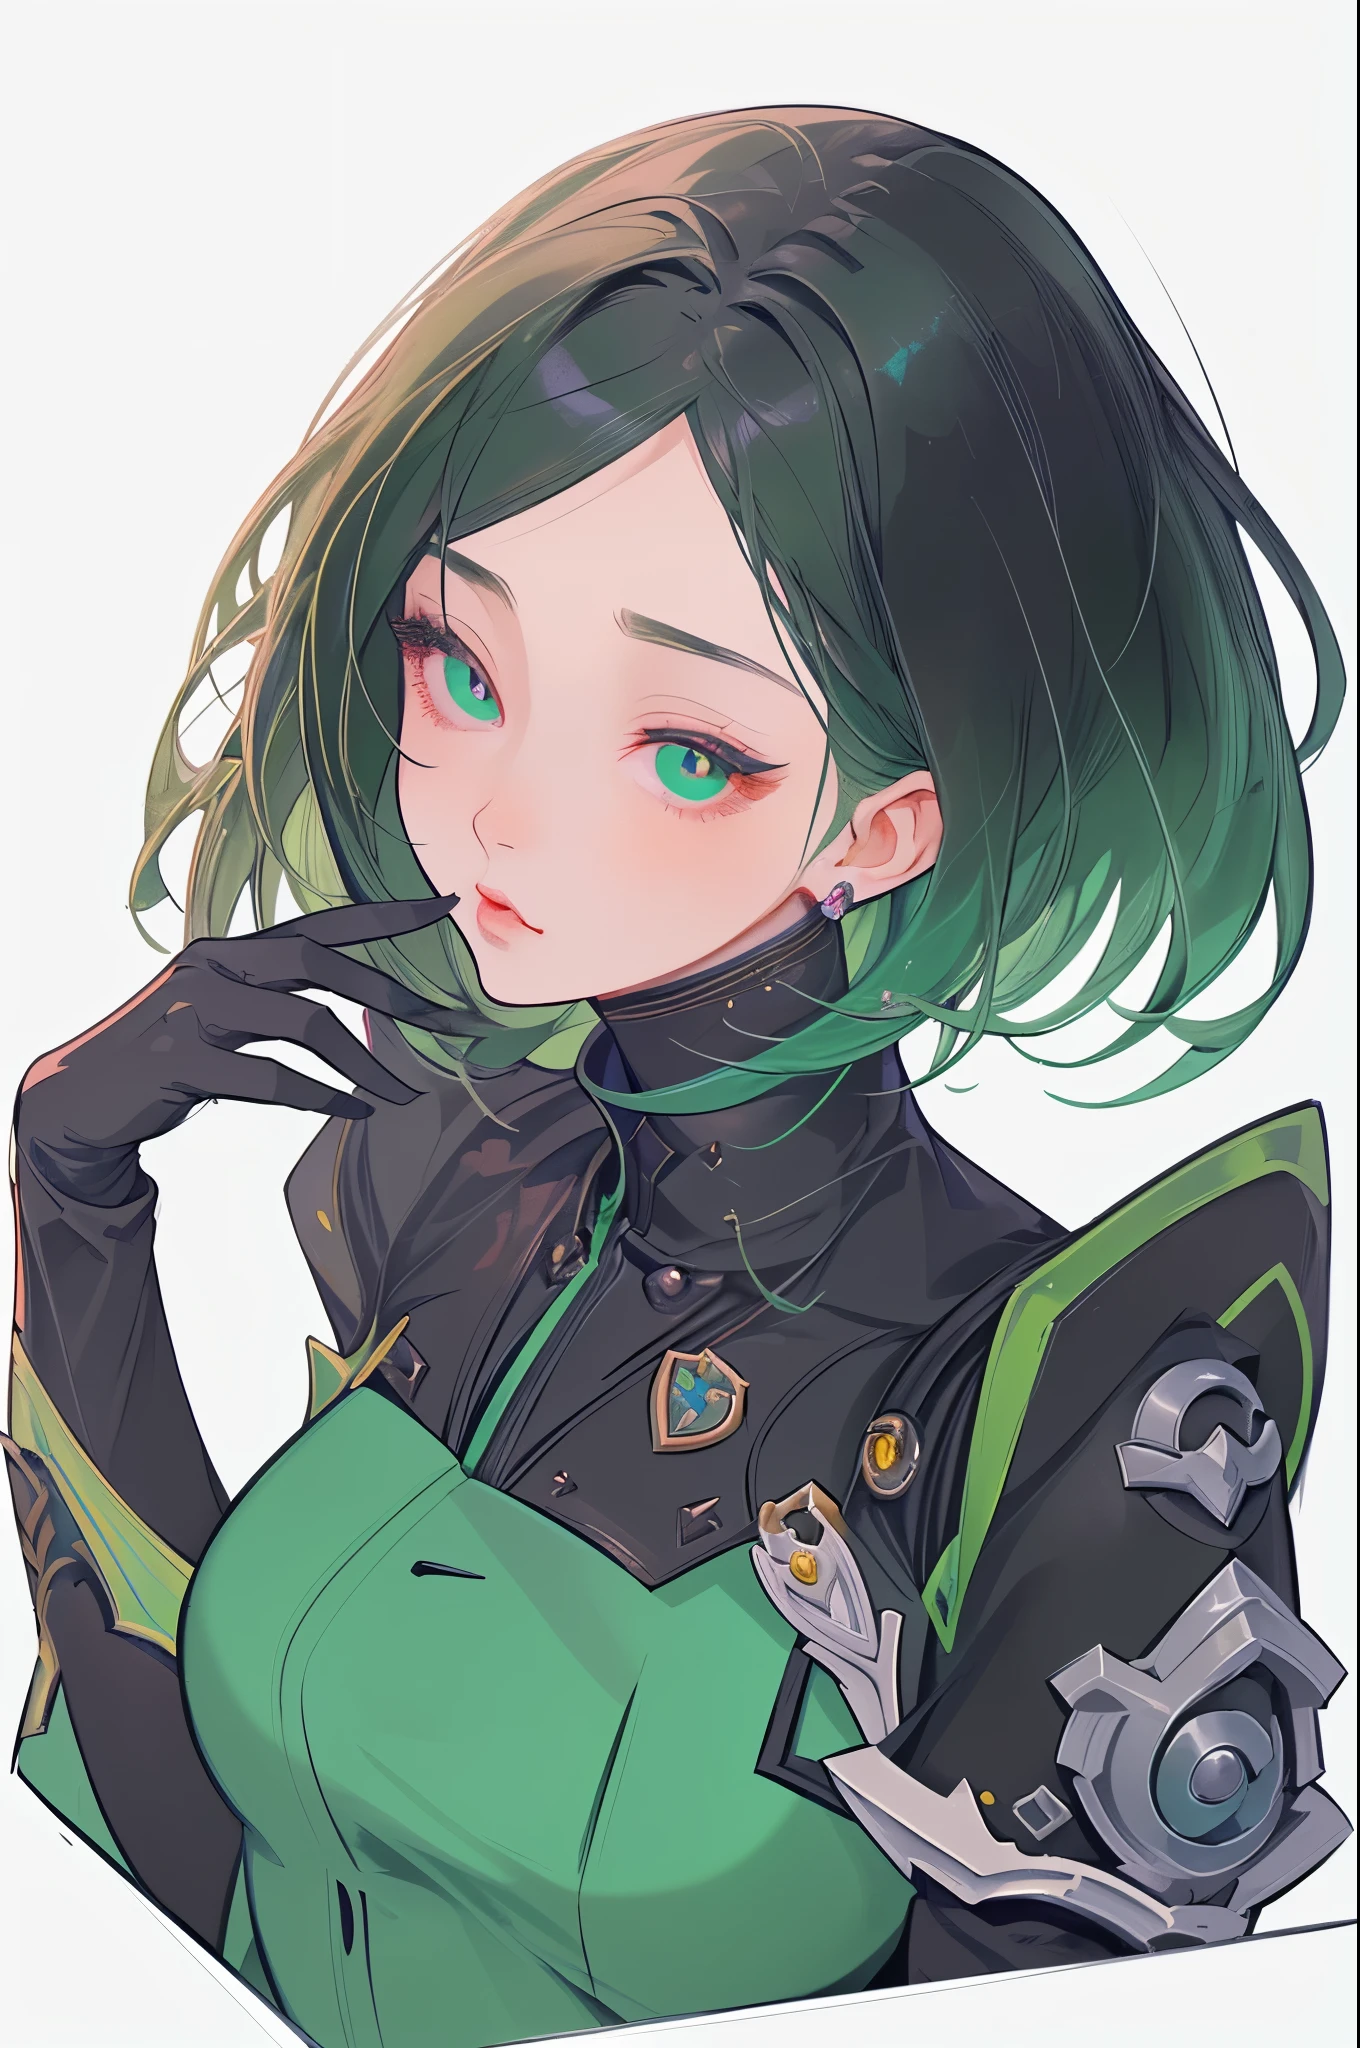 a drawing of a woman with green hair and a black jacket, rogue anime girl, portrait knights of zodiac girl, perfect android girl, high quality colored sketch, demon slayer rui fanart, highly detailed exquisite fanart, android heroine,  cute cyborg, from overwatch, 极其详细的Artgerm, high quality fanart, overwatch fanart, Senna de League of Legends